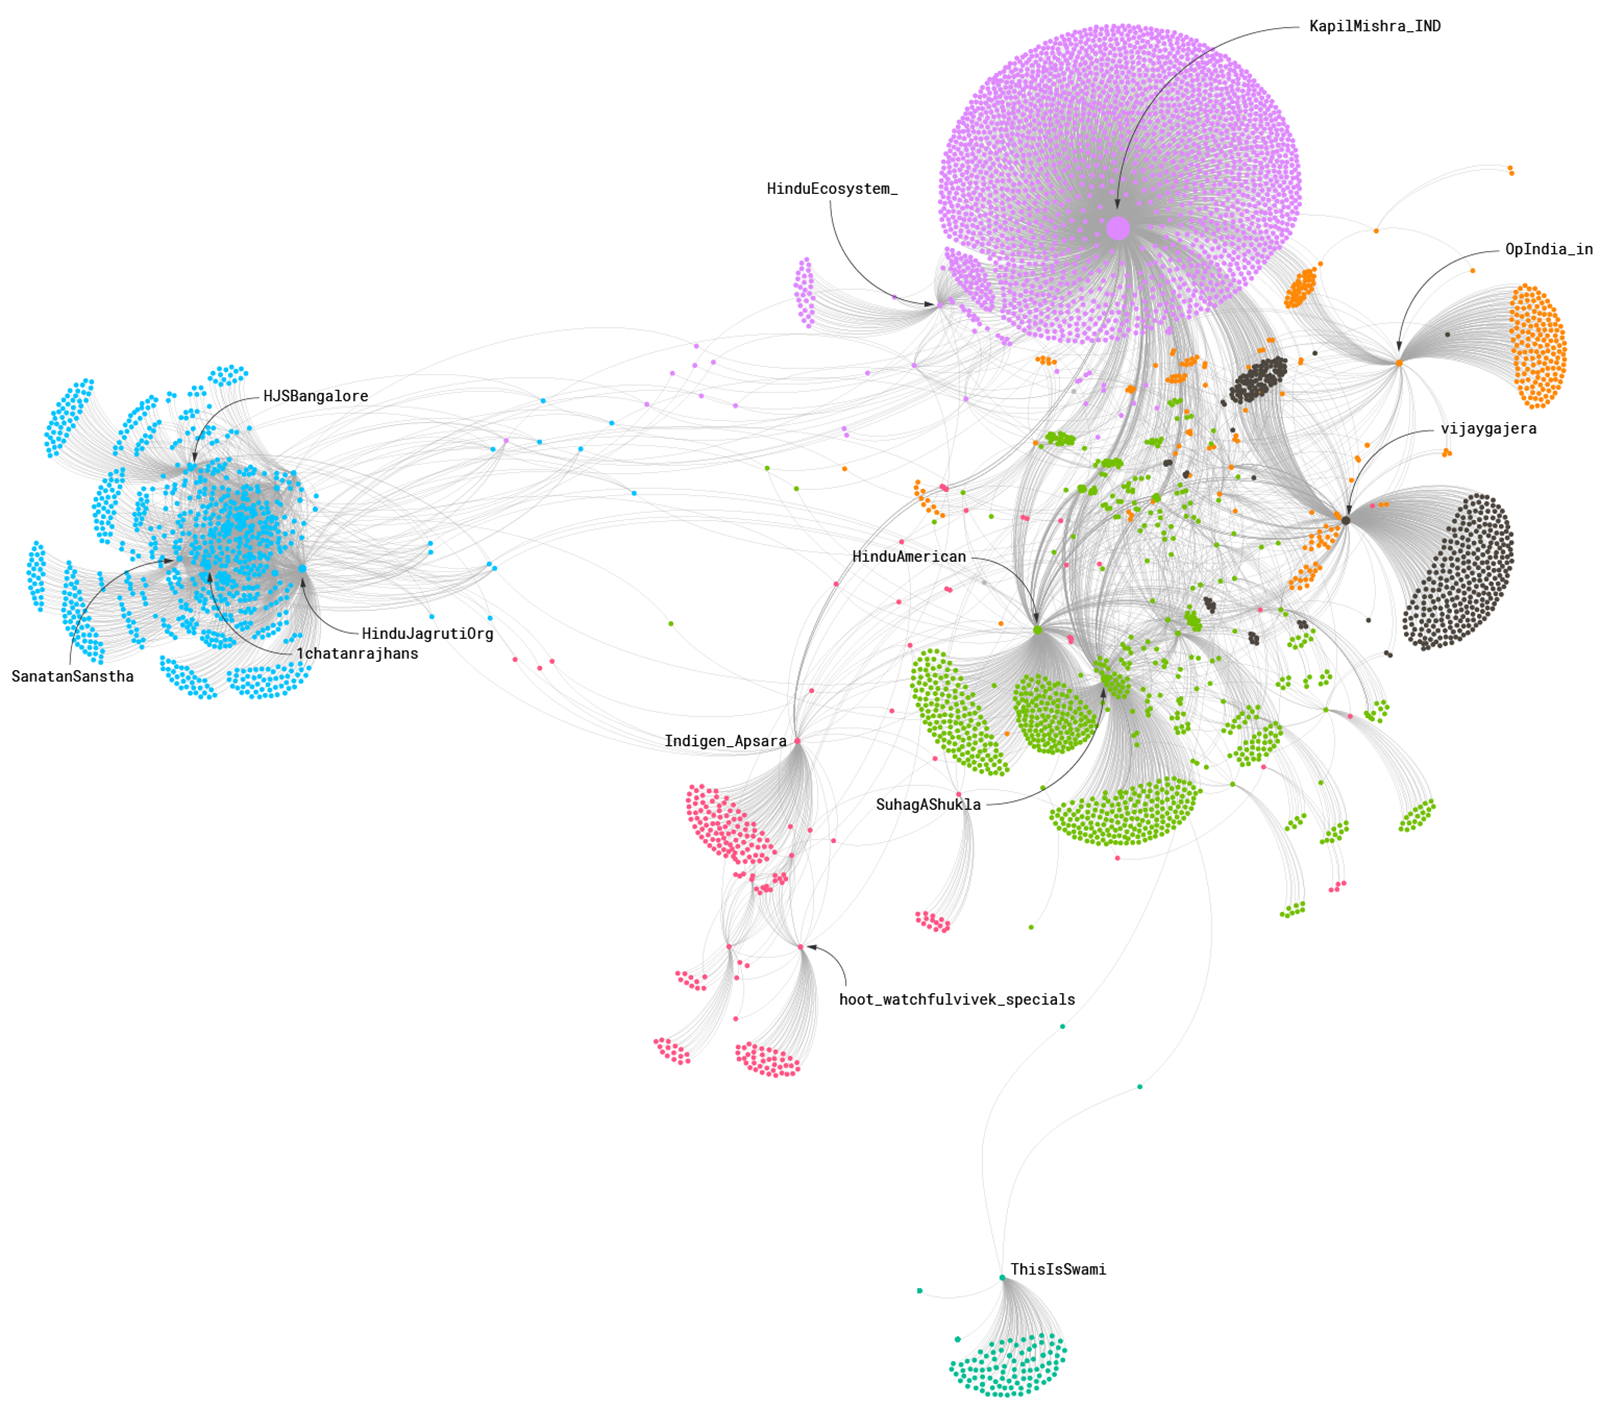 Network of attackers and top retweeters